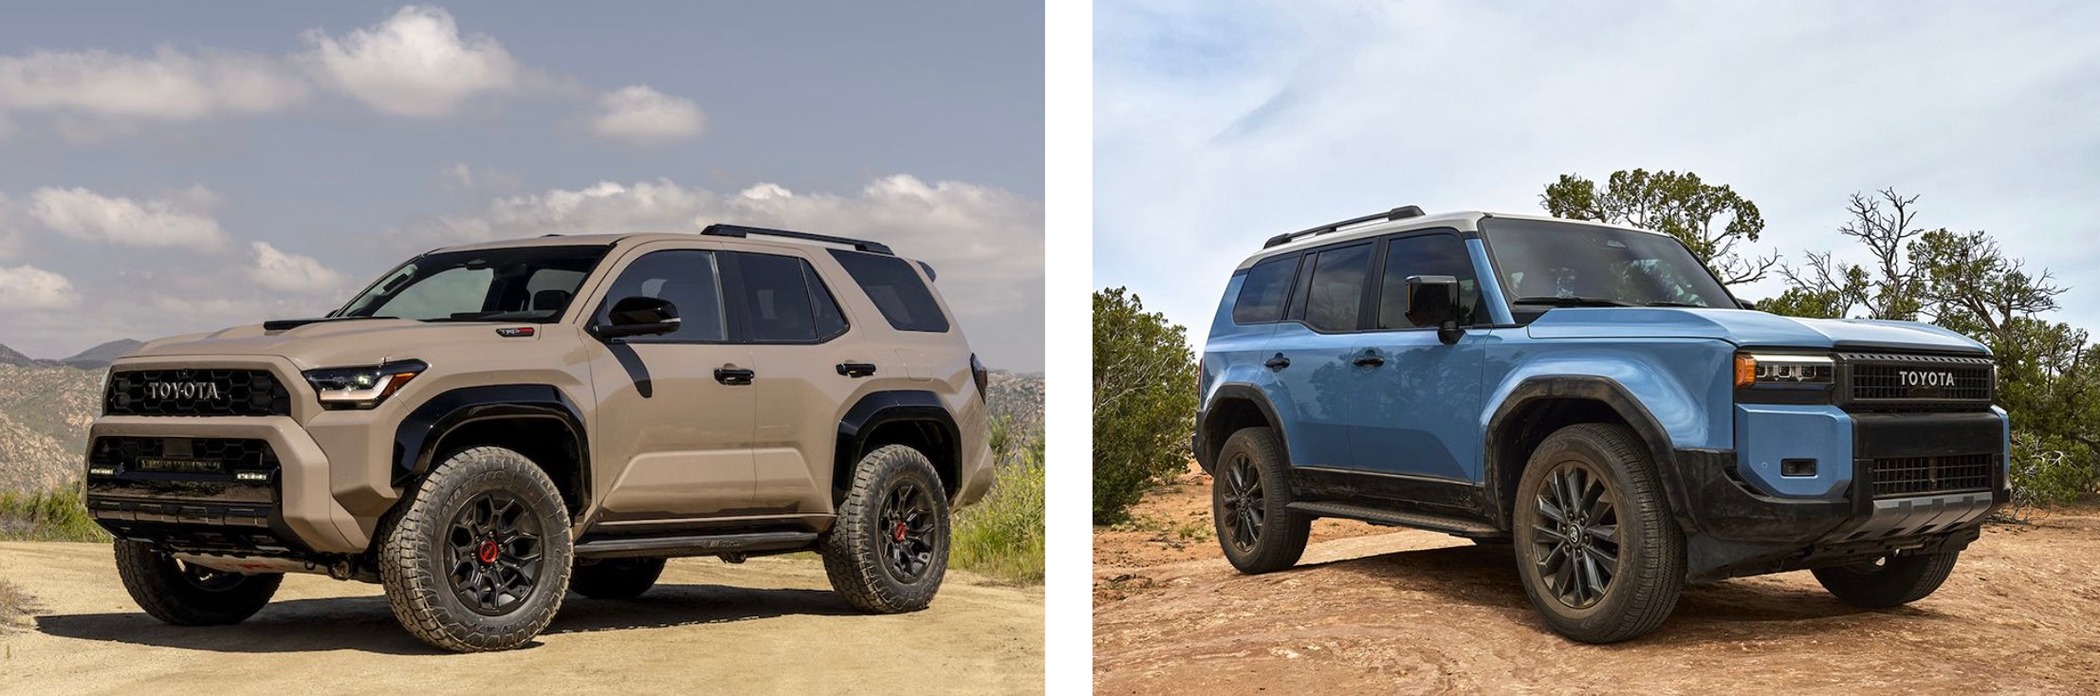 2025 Toyota 4runner Specs Comparison: 2025 4Runner vs Land Cruiser -- size / dimension, powertrain, towing, ground clearance, approach / departure / breakover angle 2025 4Runner vs. Land Cruiser side by side comparison